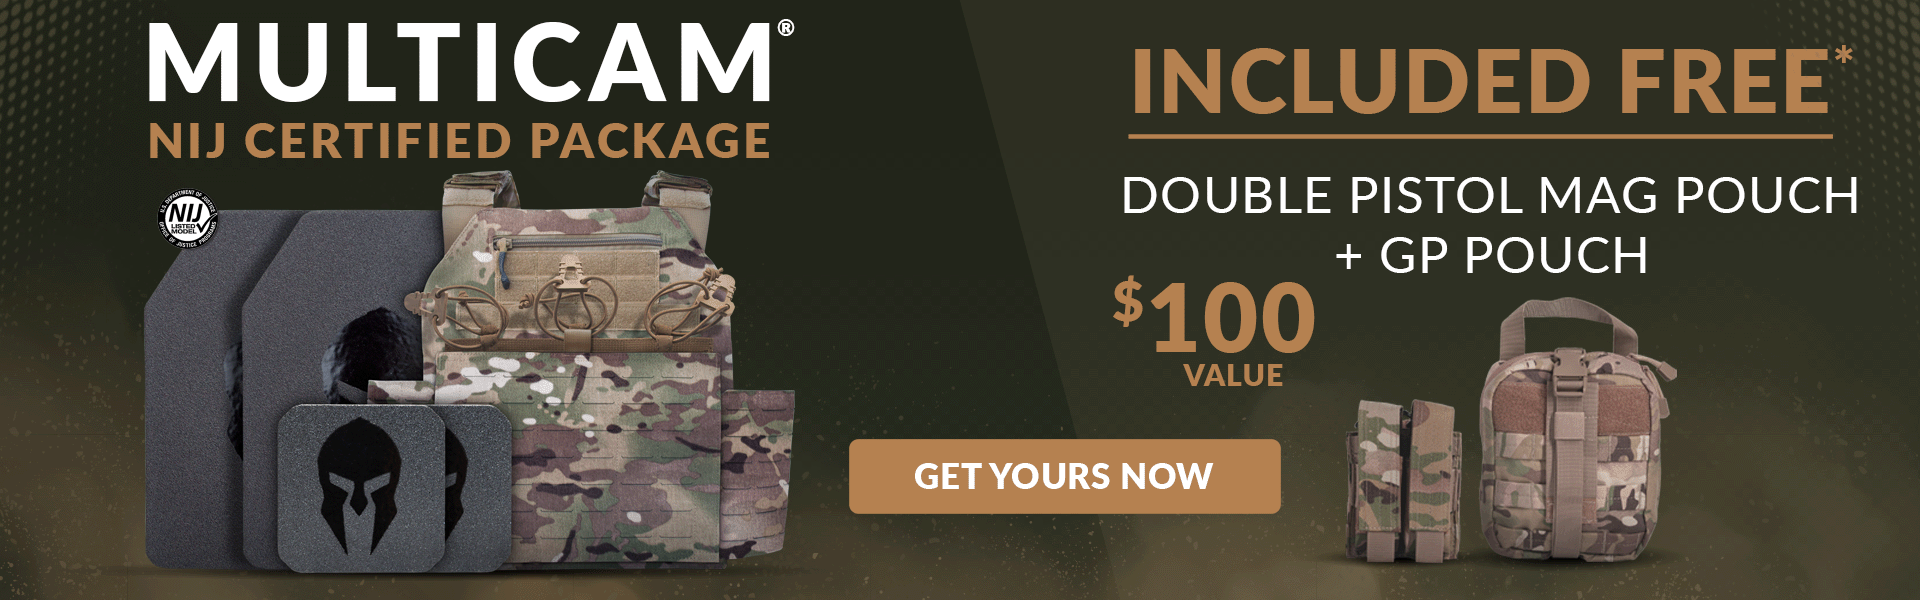 NIJ Certified Achilles Package - FREE pouches with MultiCam&reg; variant